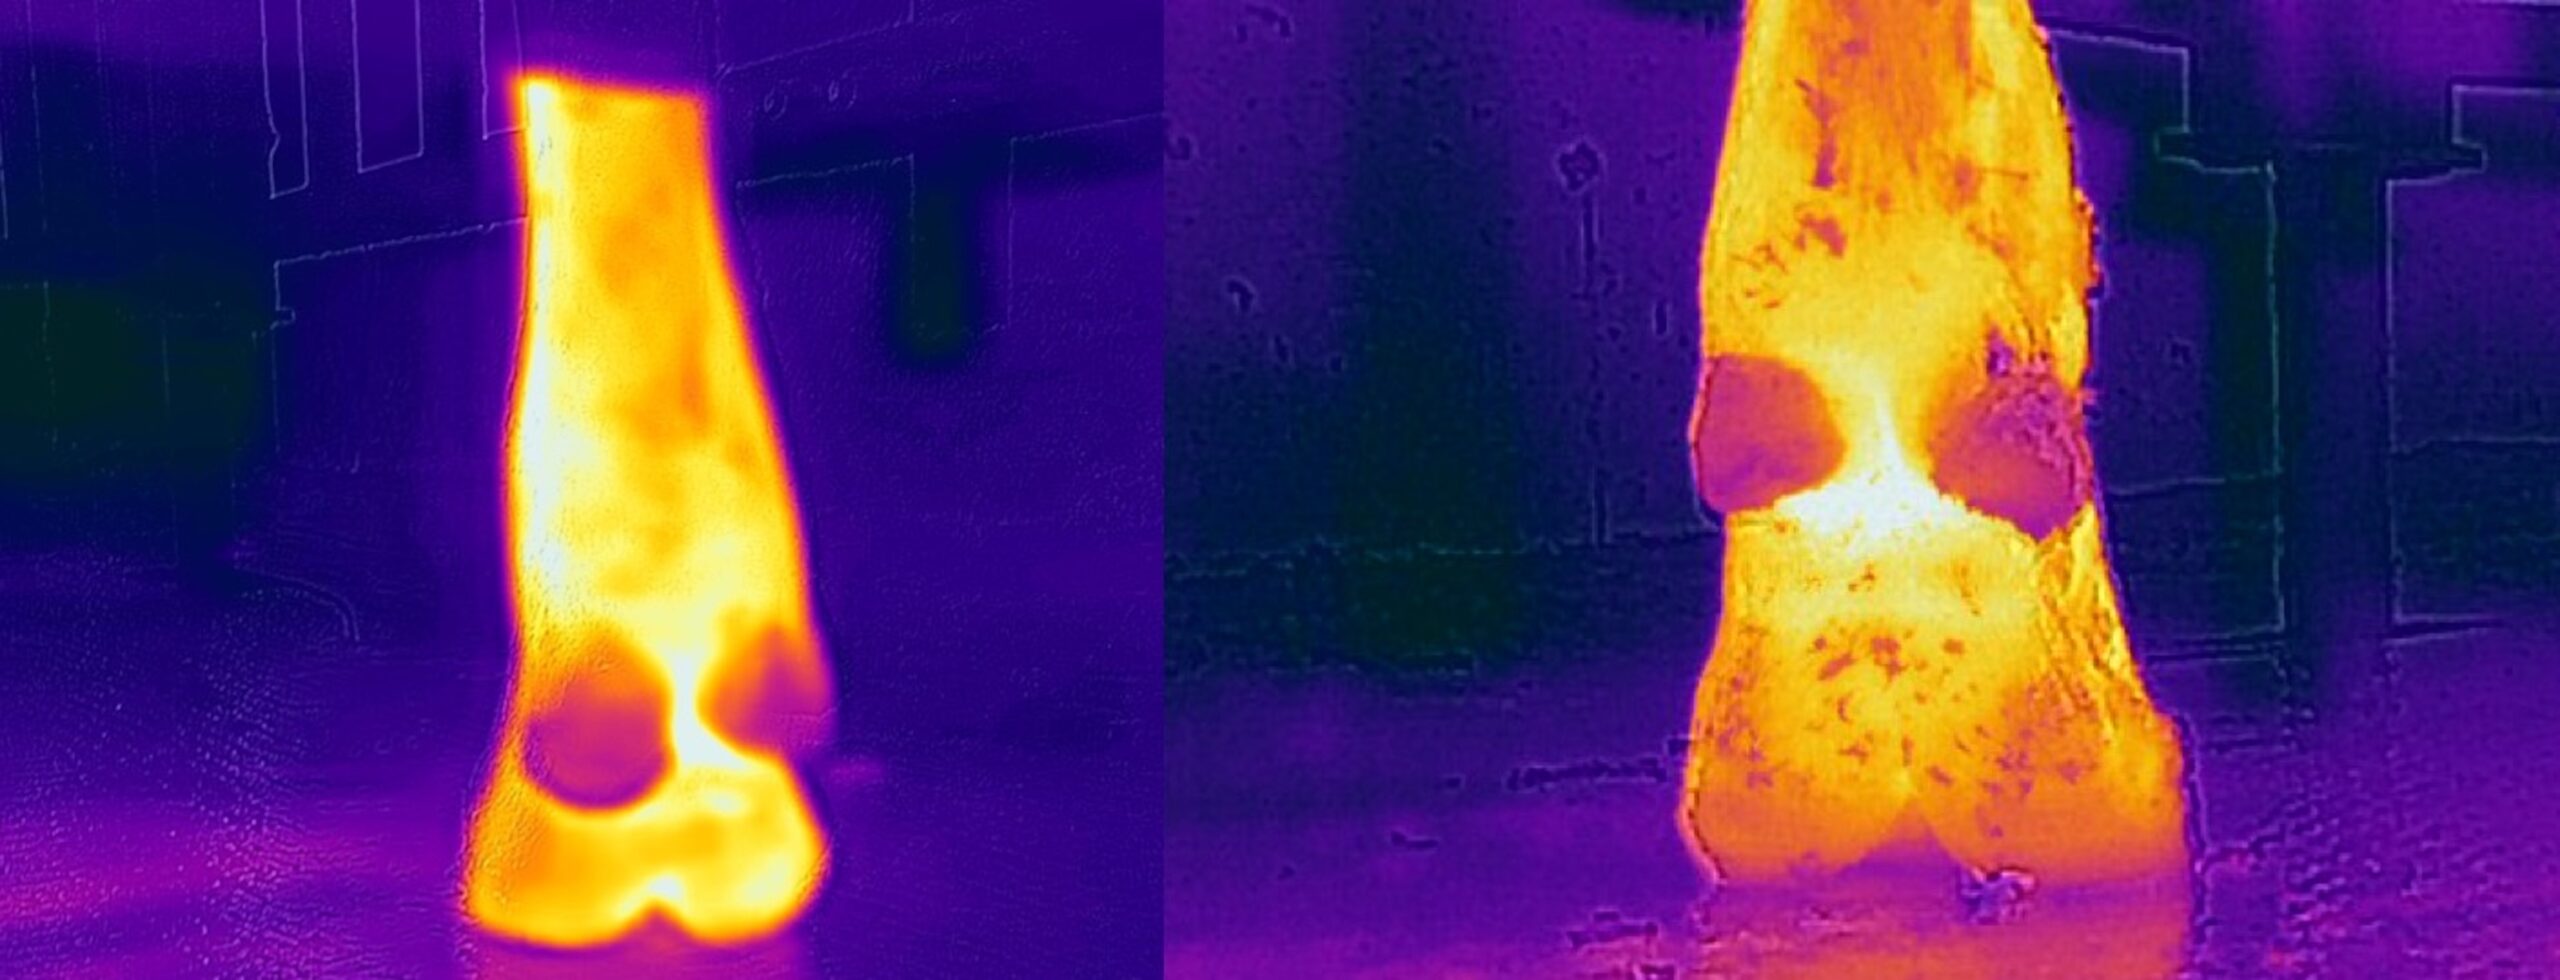 New Royal Veterinary College study finds low-cost thermal image devices could be as effective as expensive alternatives in detecting lameness in dairy cattle